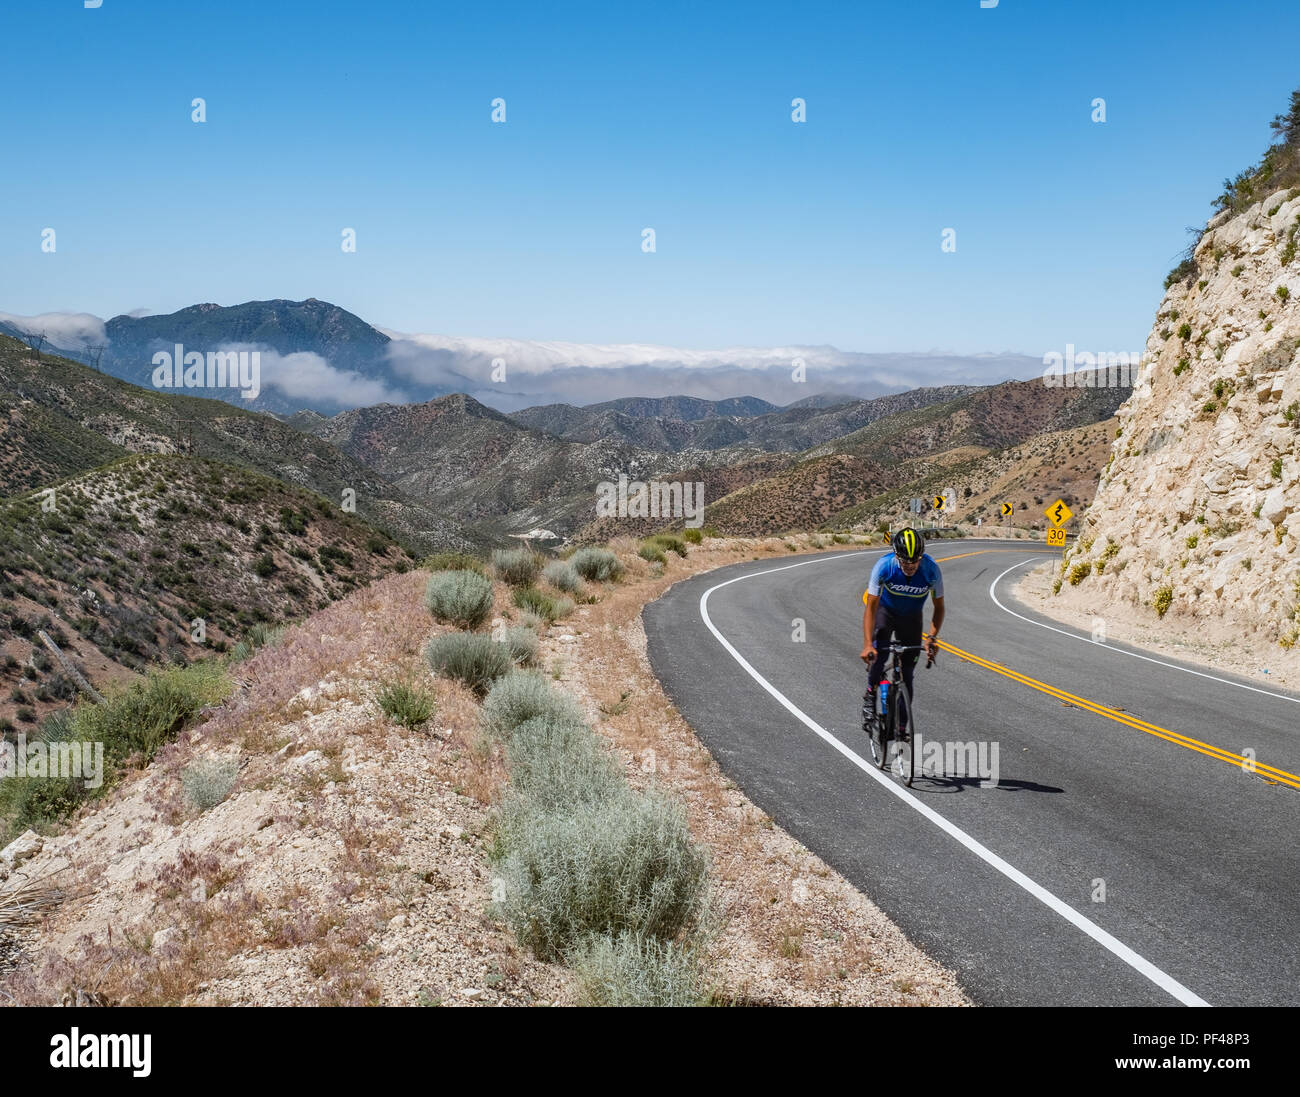 an intrepid bicyclist pushes up a long grade on the Angeles Forest Highway in the ANF.  A peak of the San Gabriel Mtns is visible in the background. Stock Photo